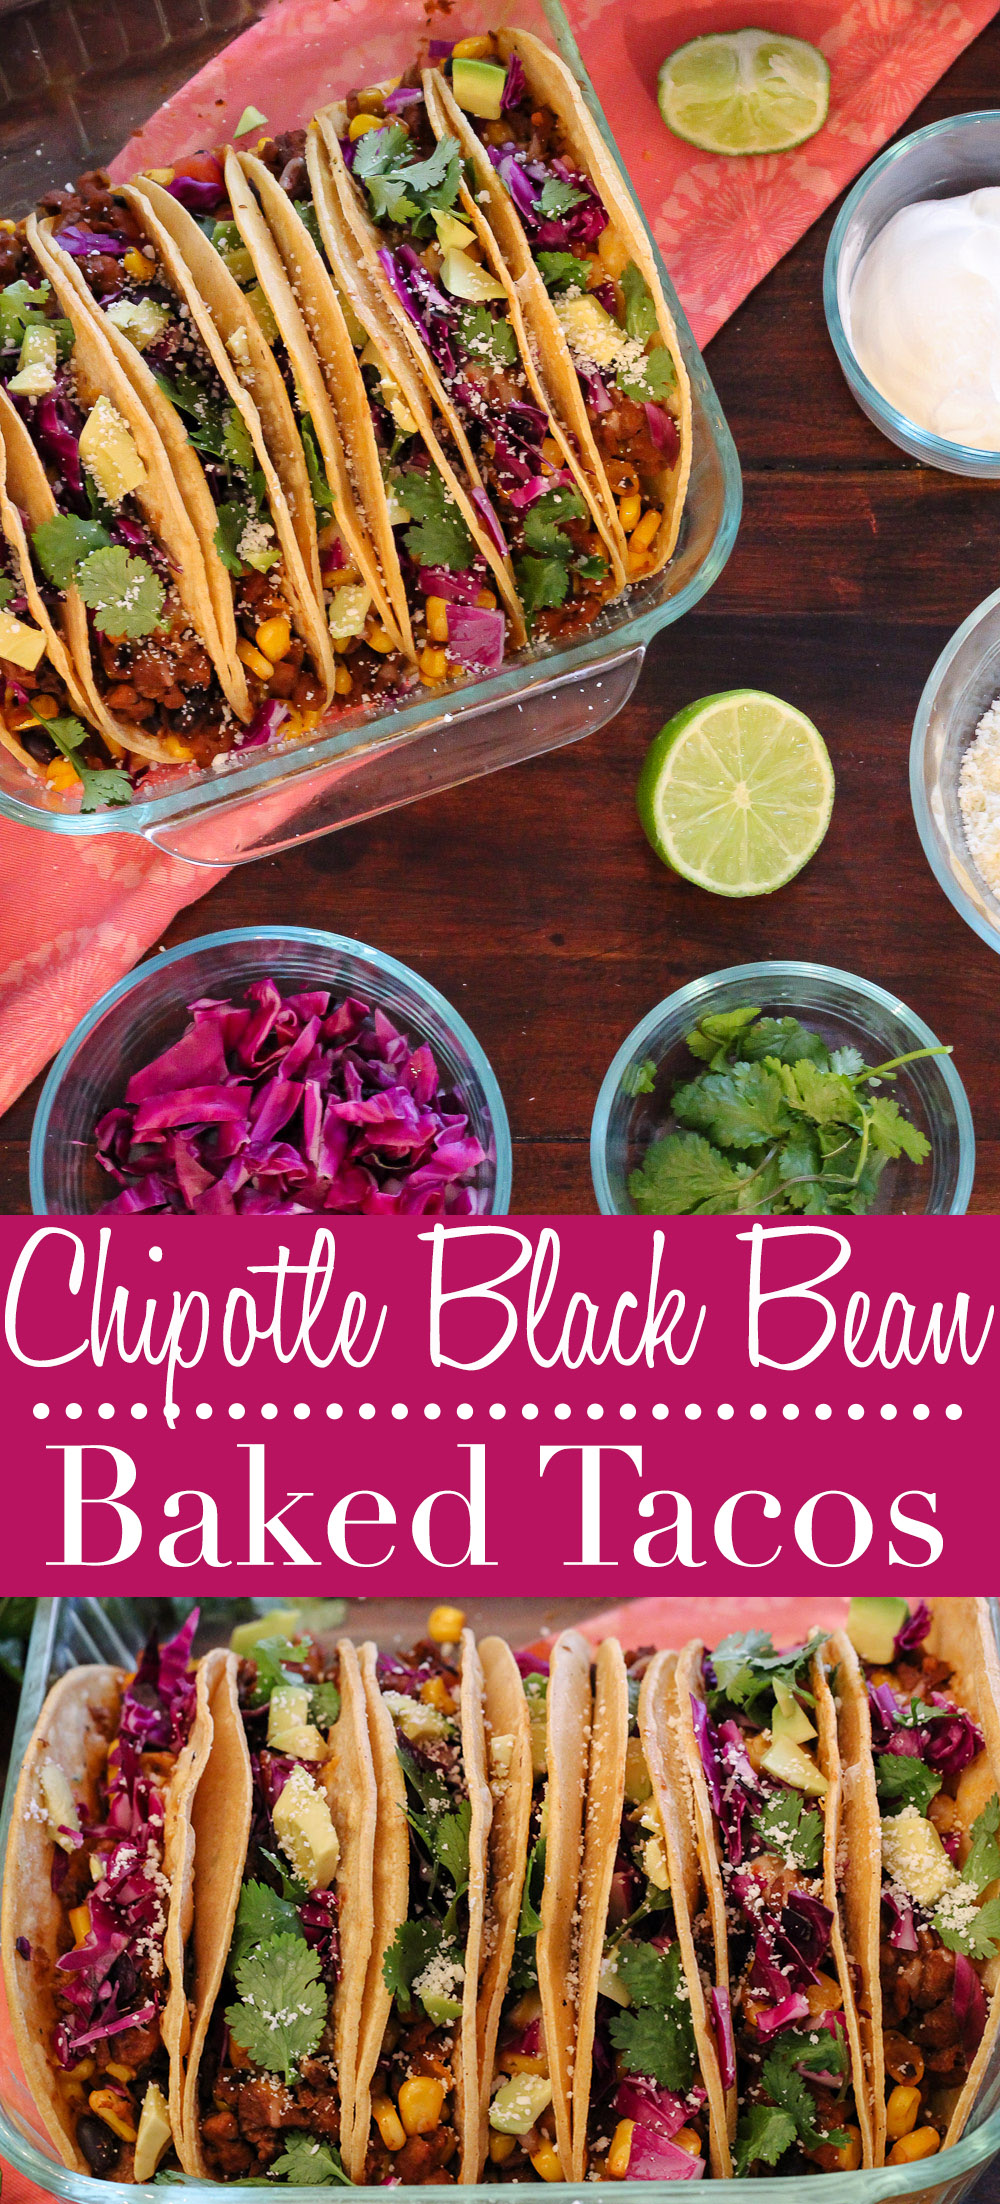 Chipotle Black Bean Baked Tacos